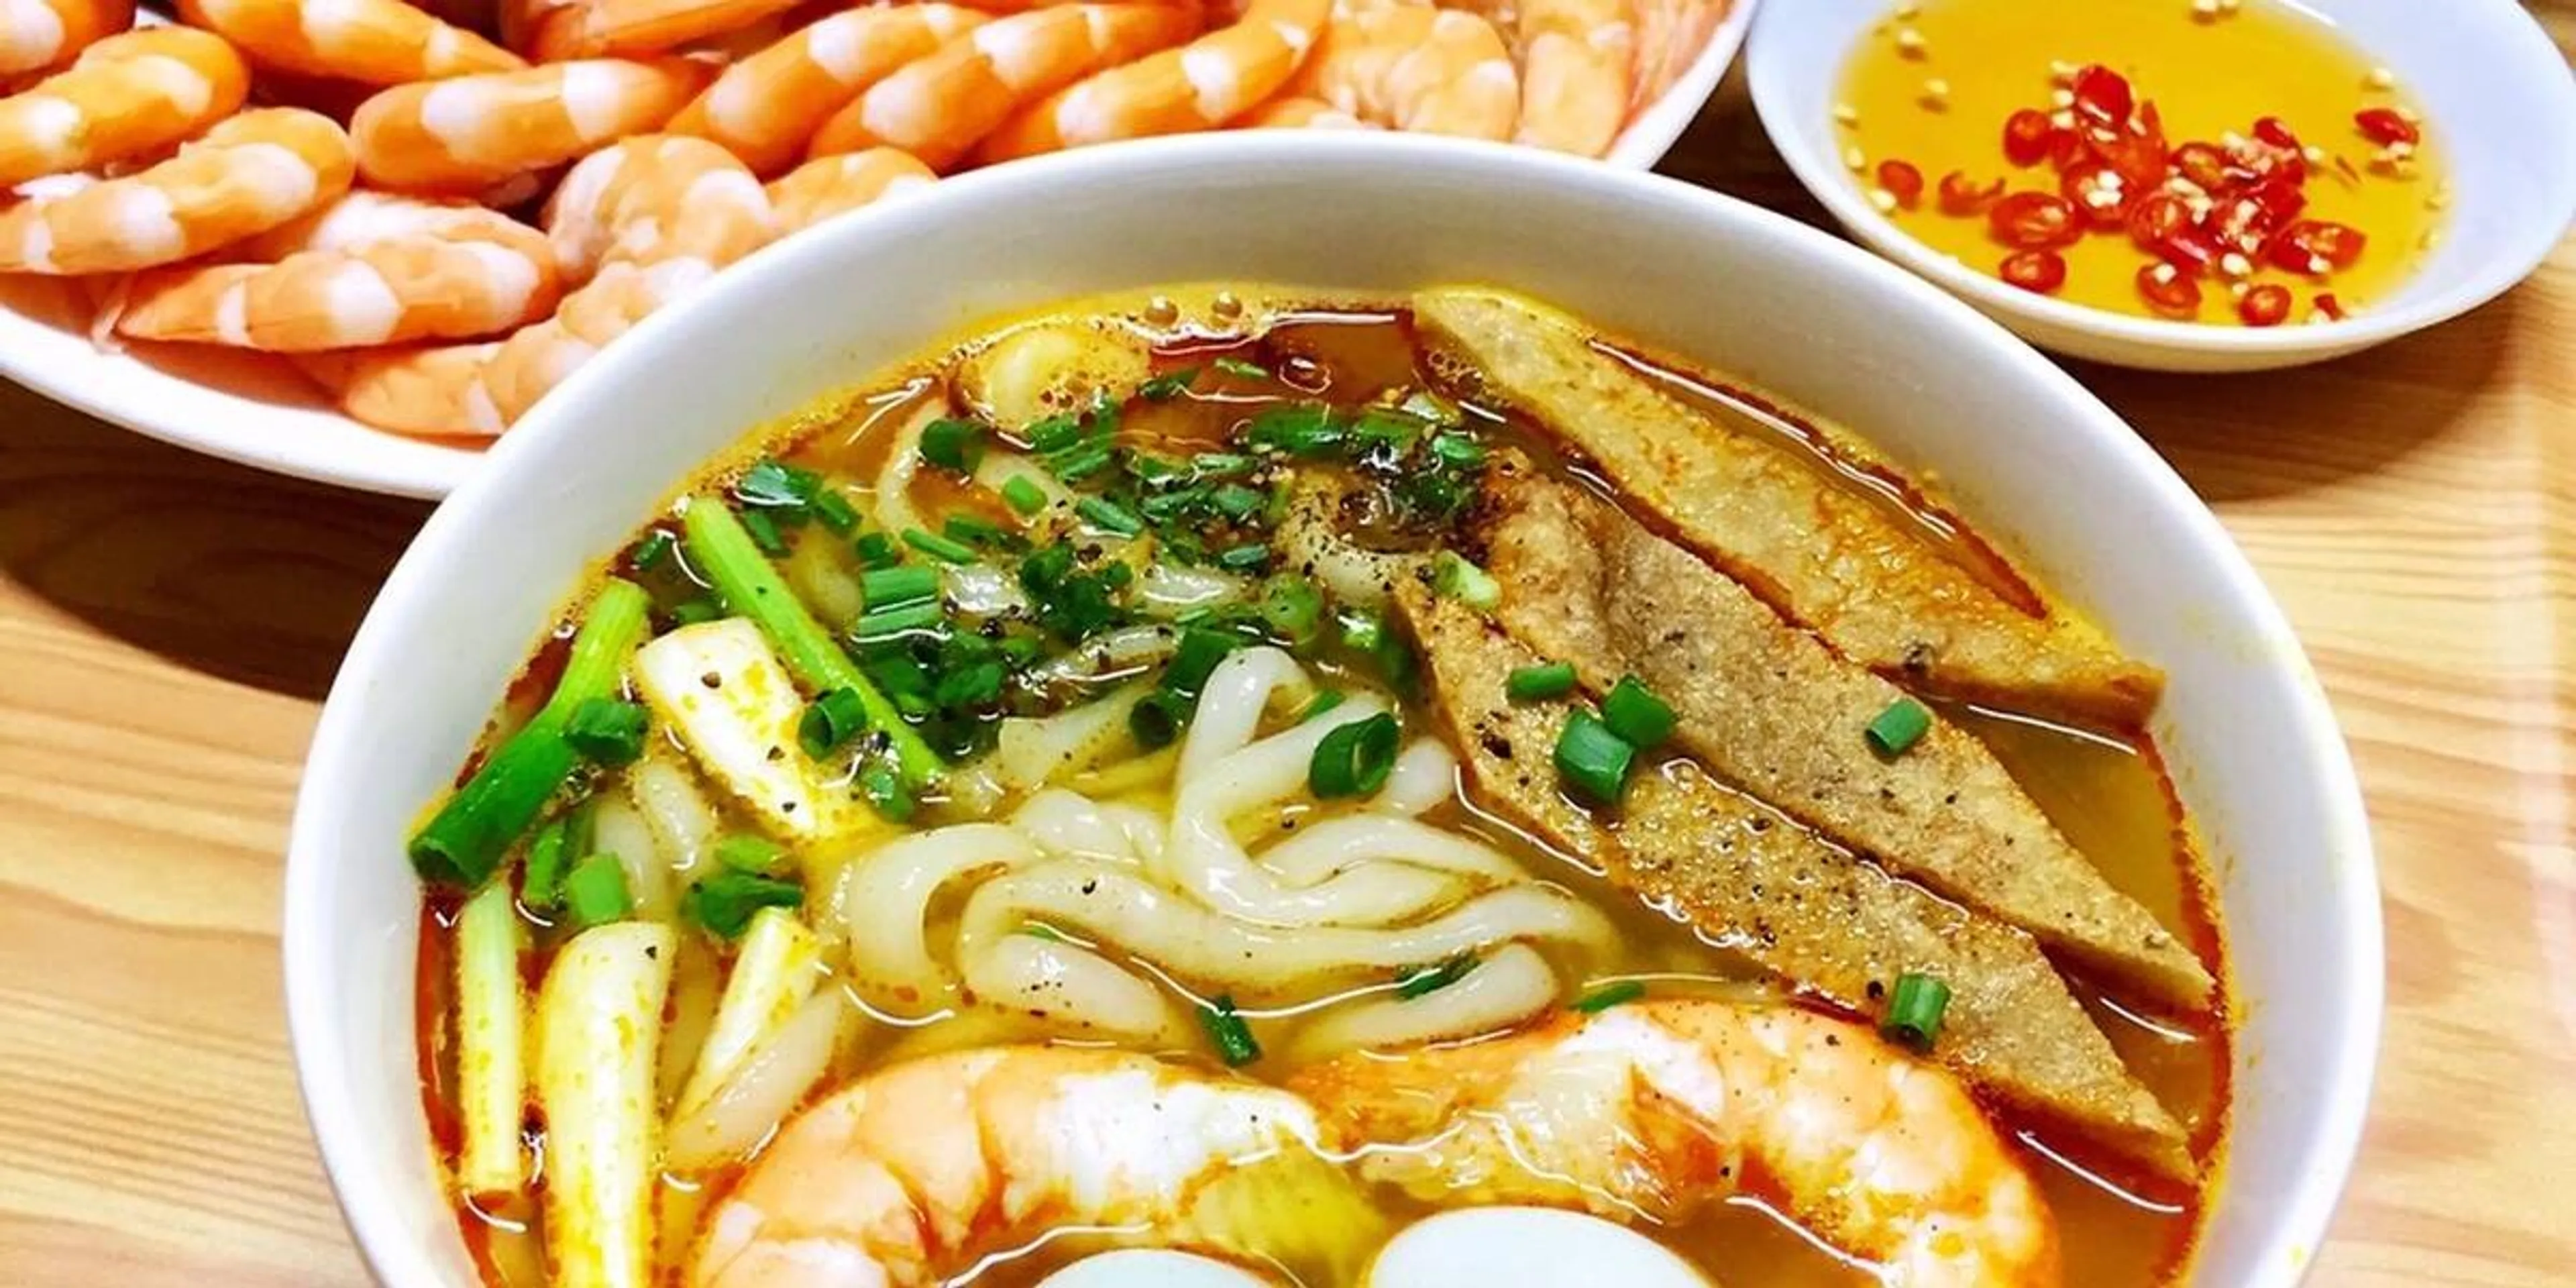 Discover the most attractive Danang rice cake noodle shops in Hanoi